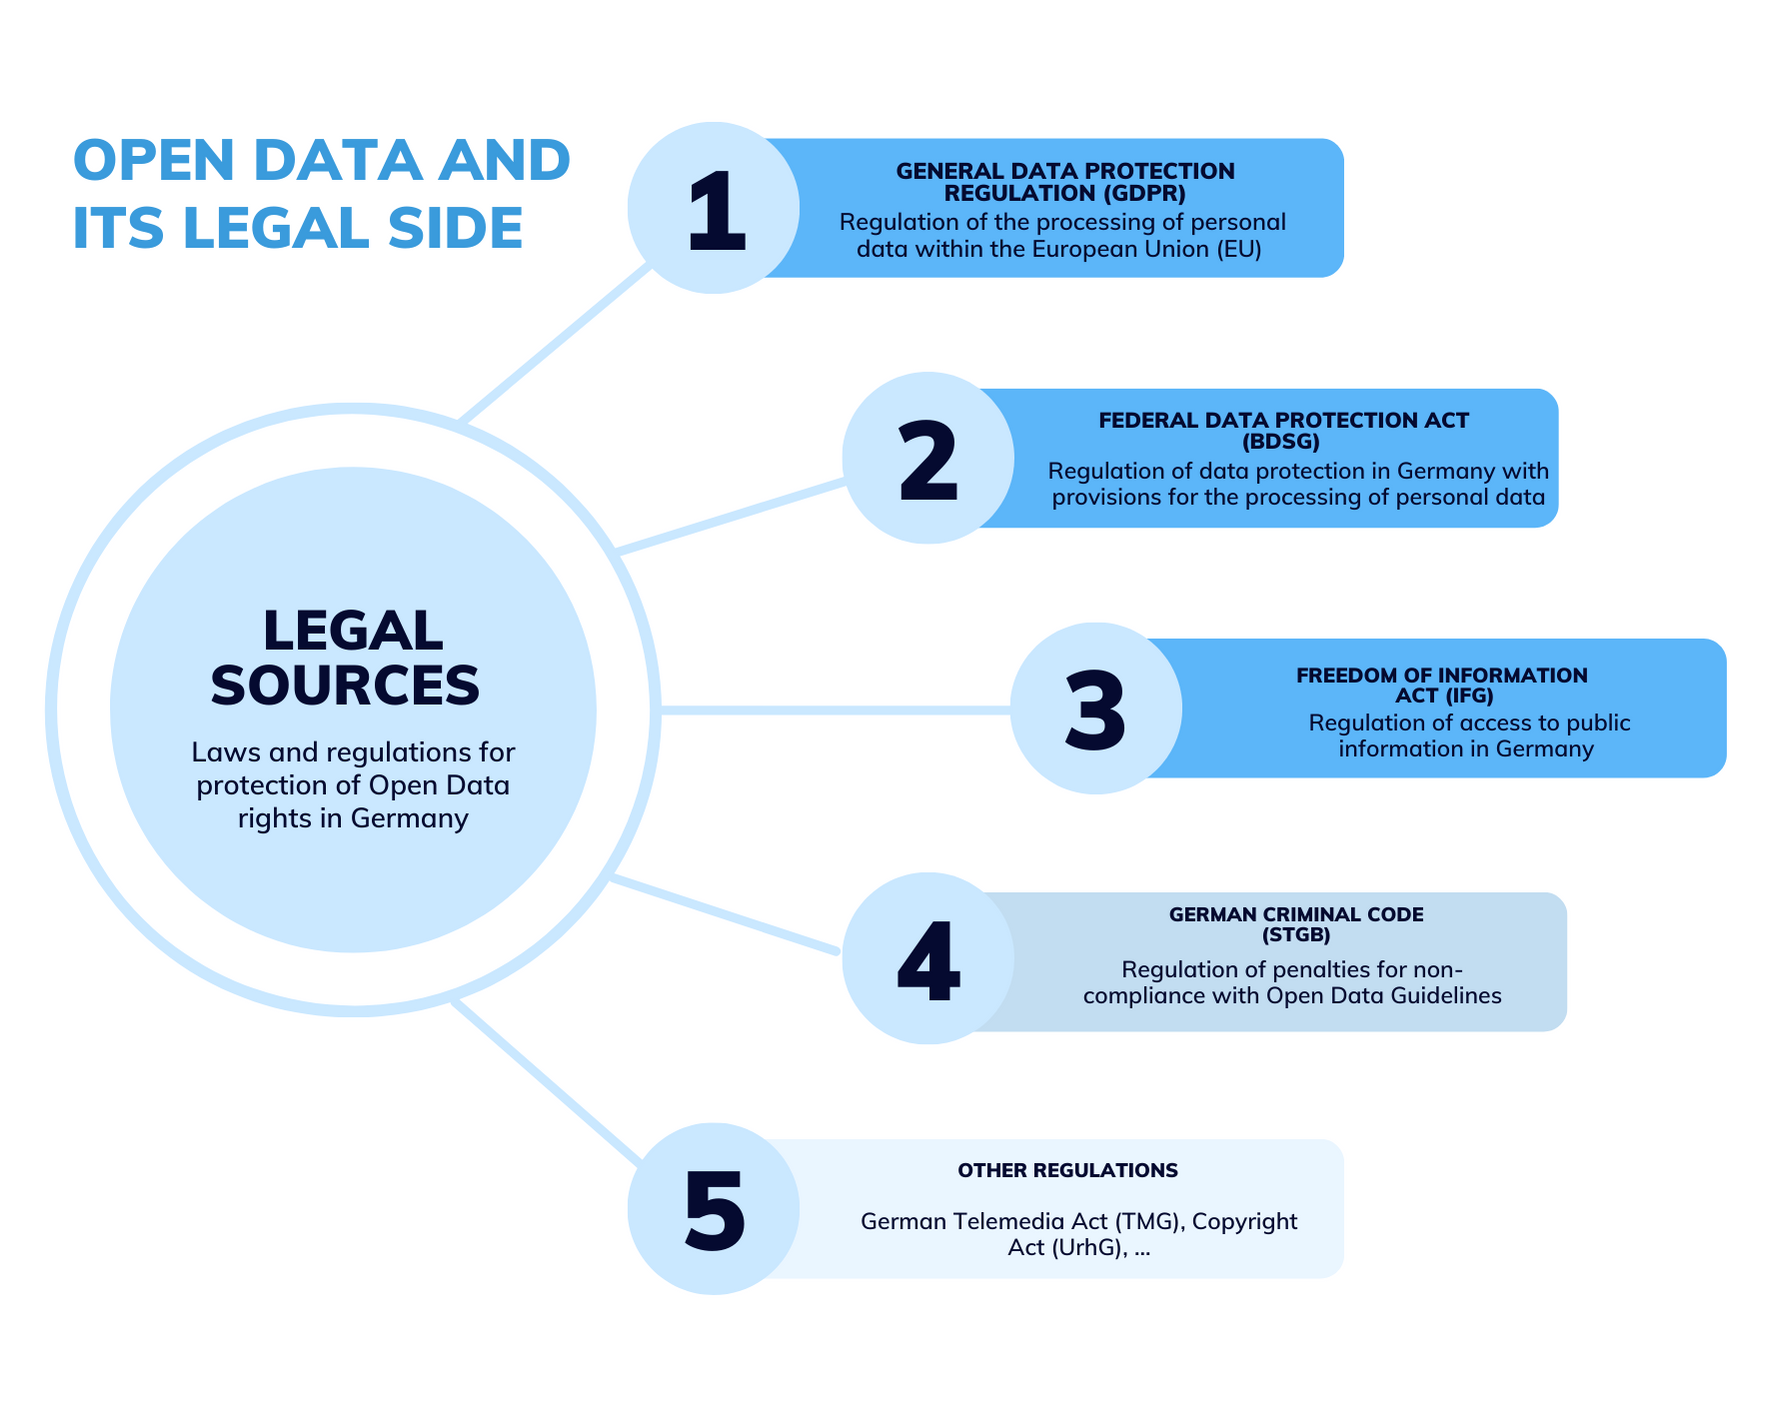 Open Data and its legal side - legal sources